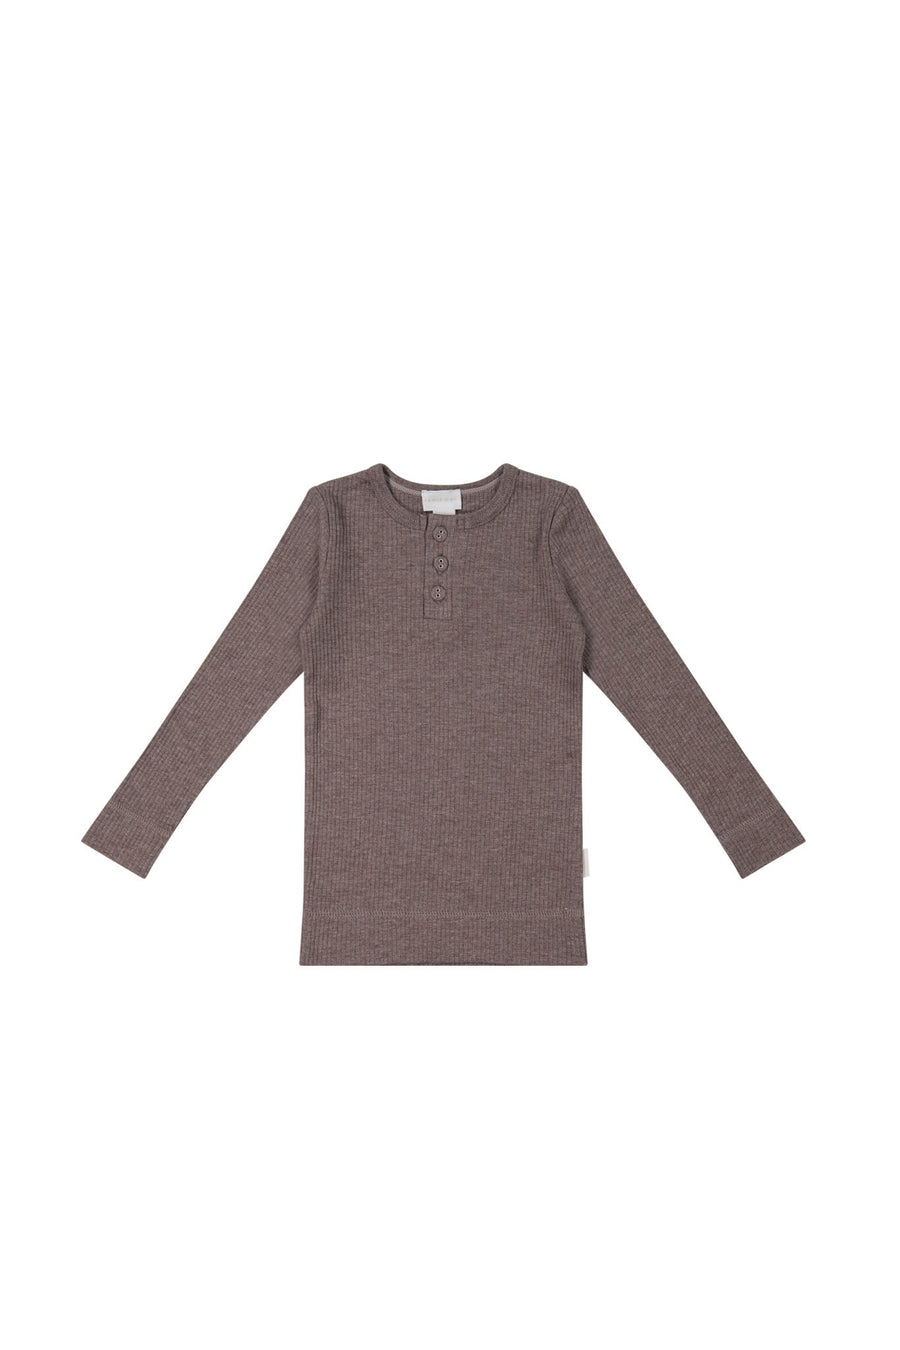 Organic Cotton Modal Long Sleeve Henley - Truffle Marle Childrens Top from Jamie Kay USA